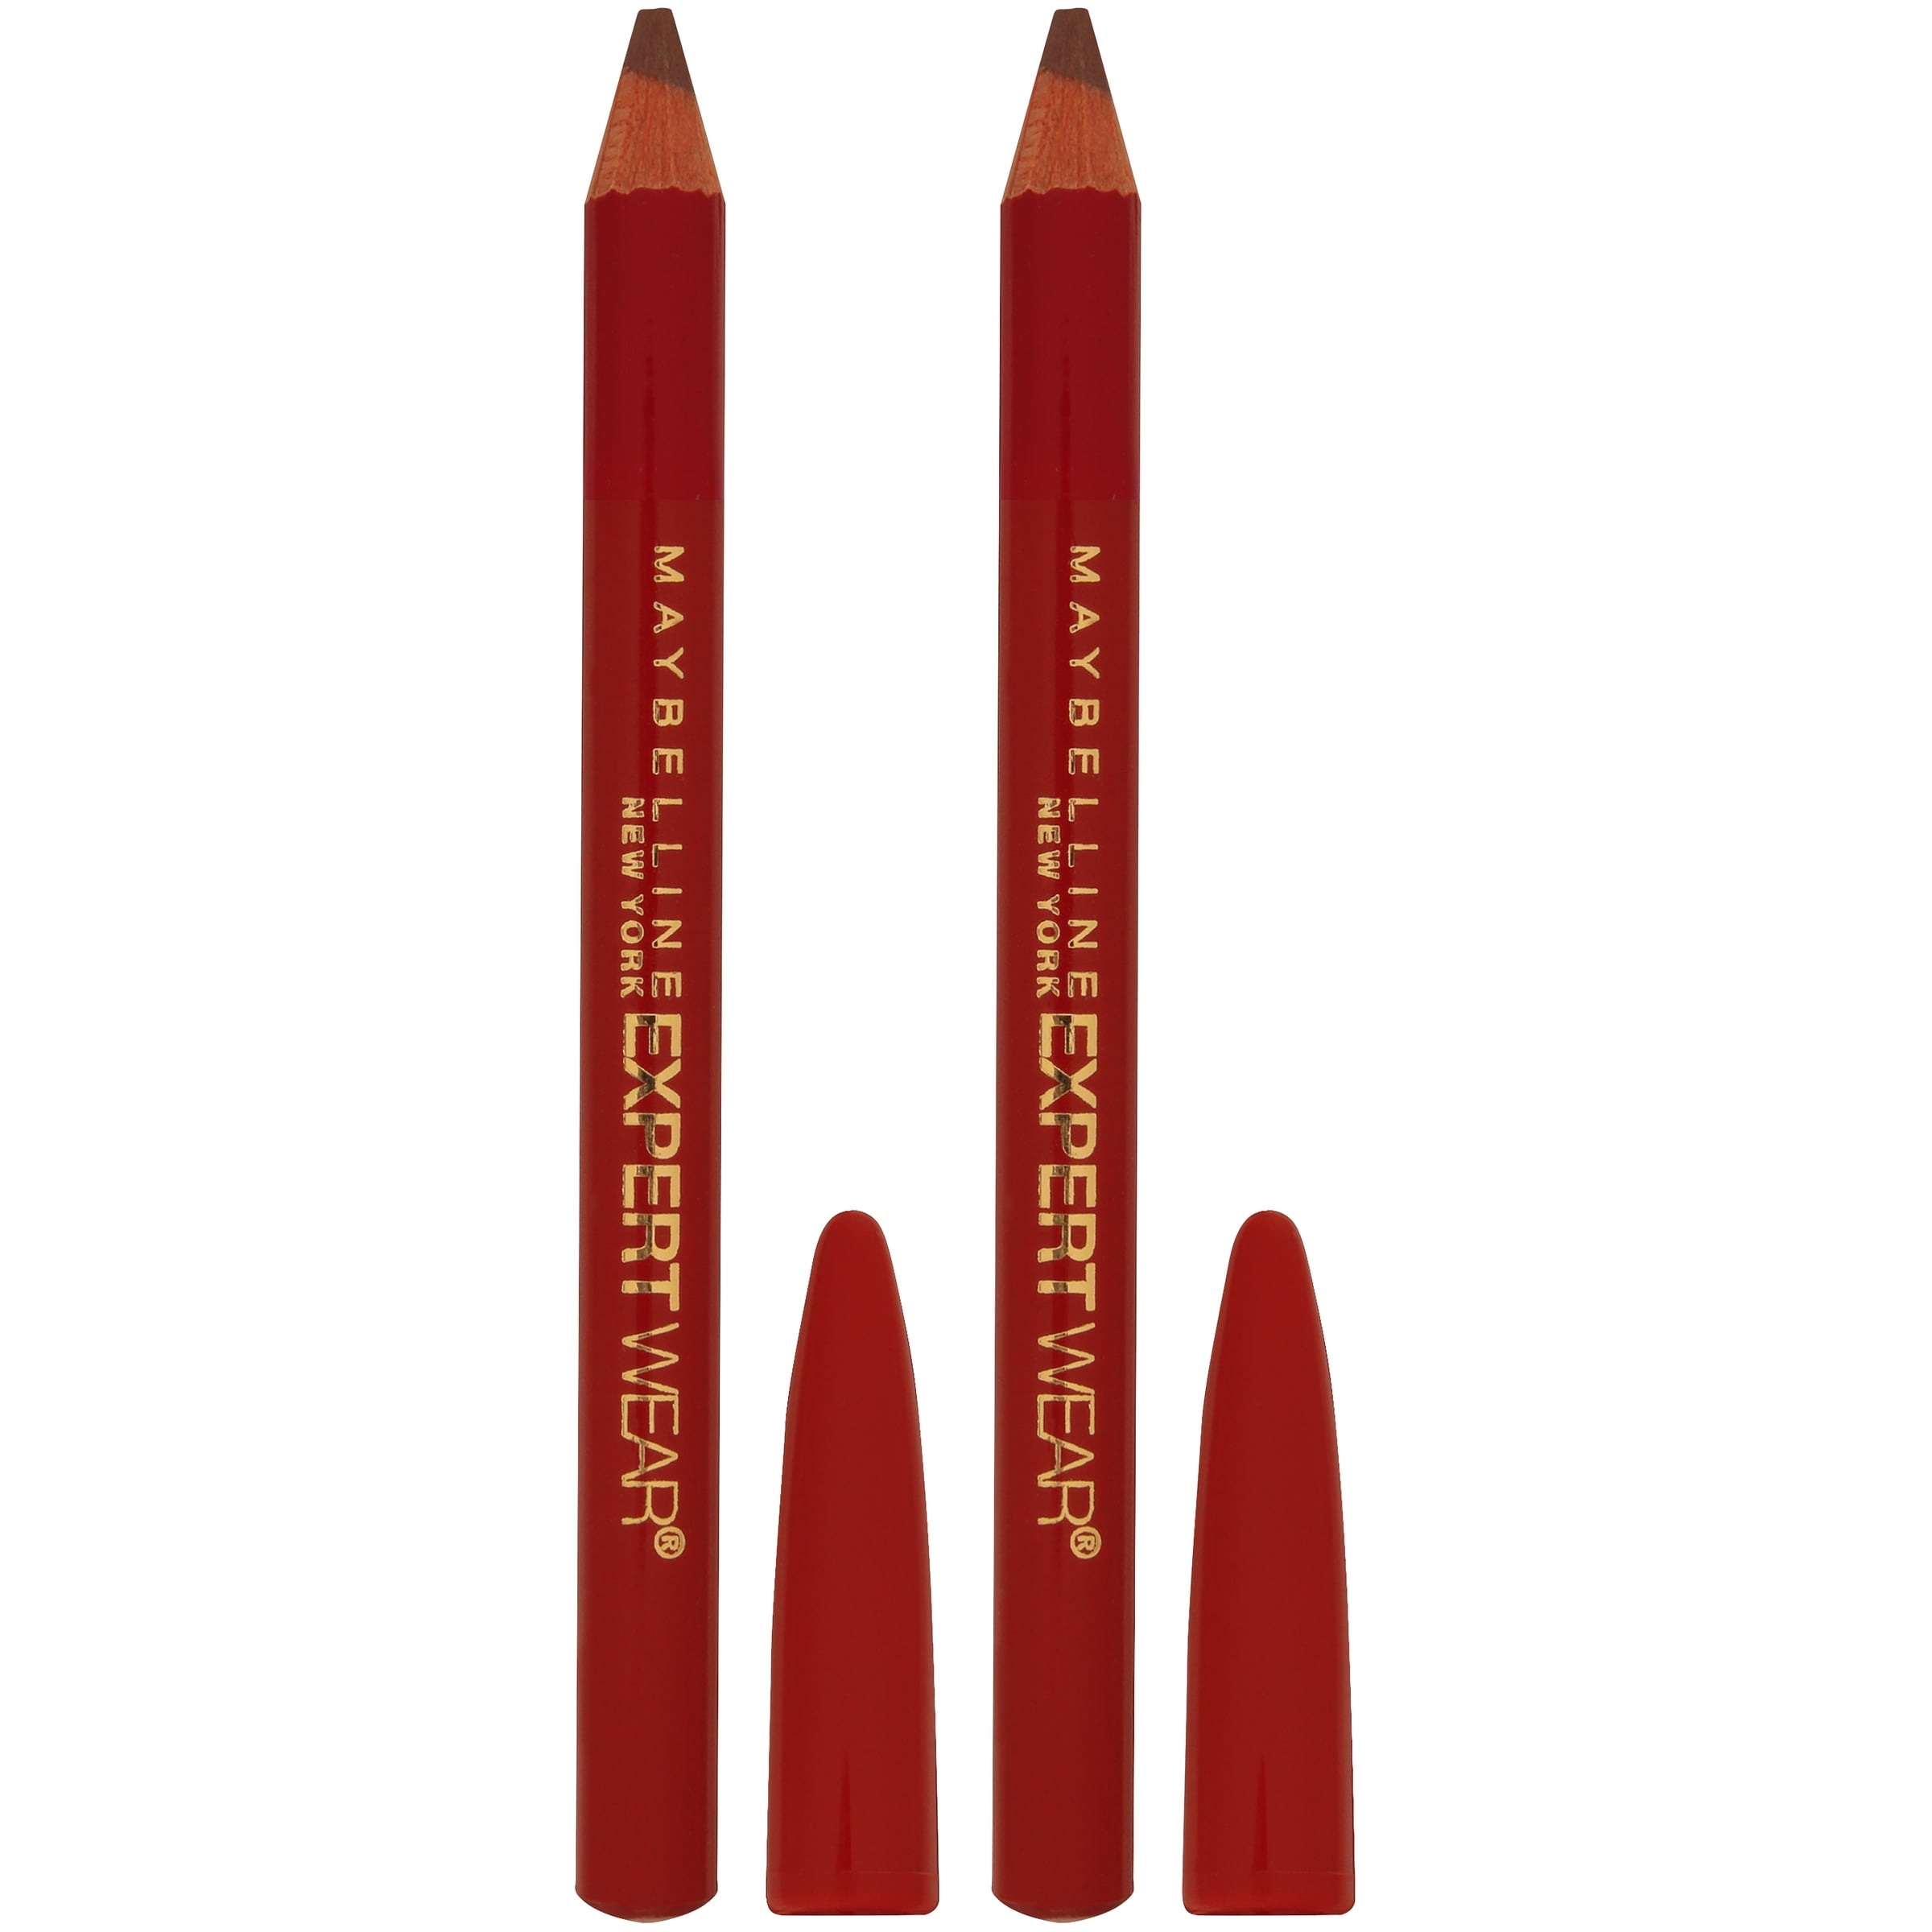 Maybelline Expert Wear Twin Brow and Eye Pencils, Light Brown